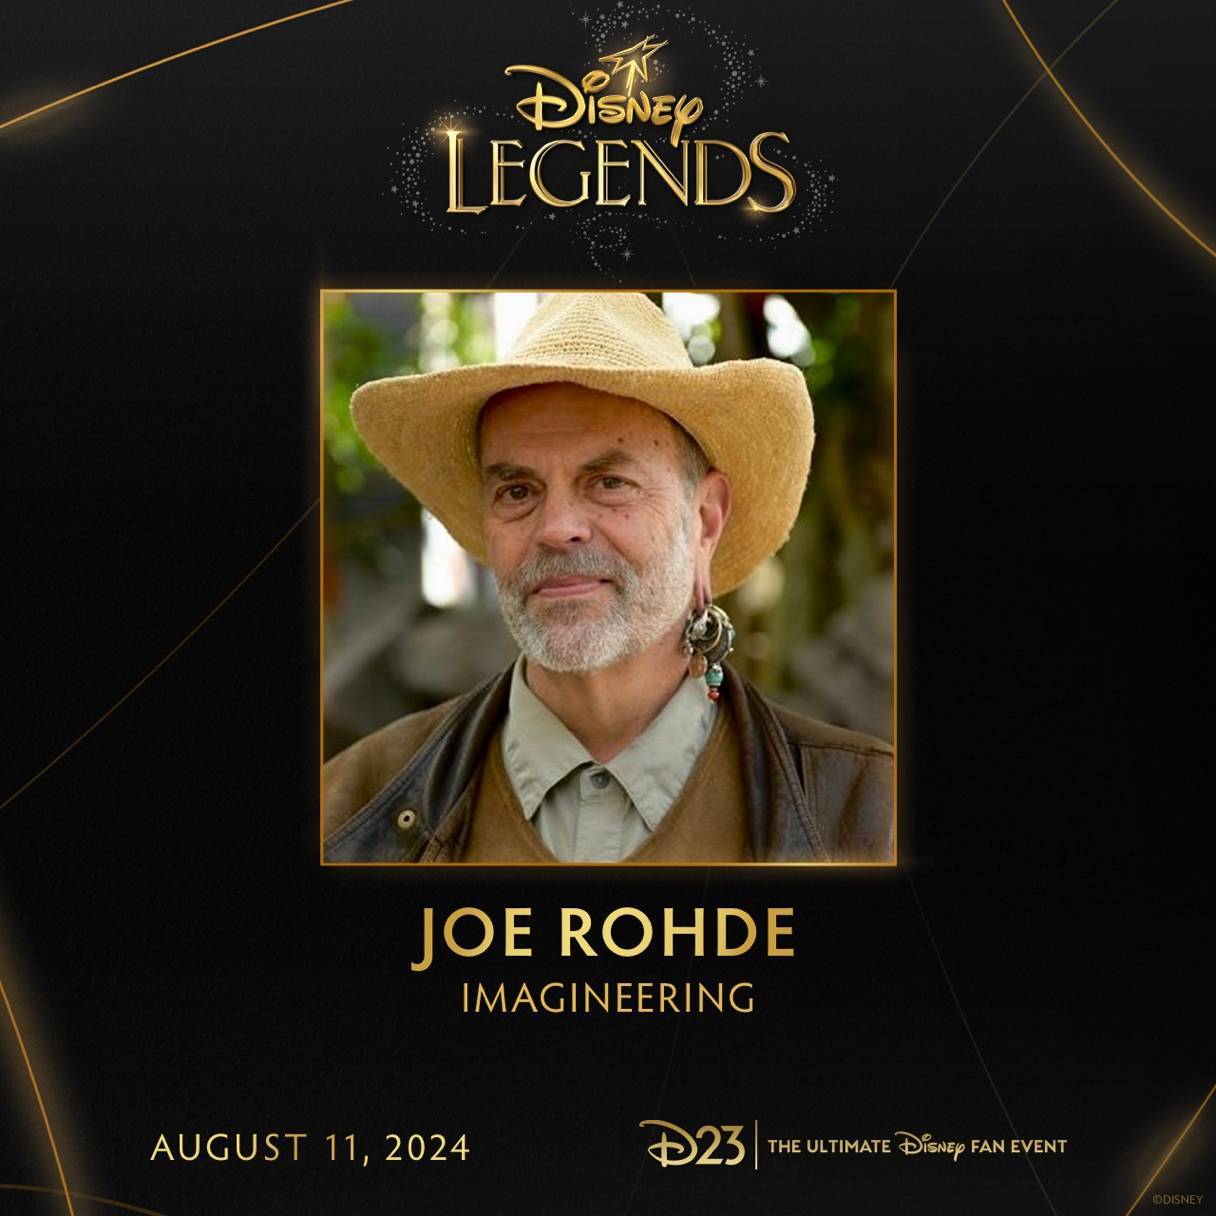 Joe Rohde spotted at EPCOT with Walt Disney Imagineers touring recent changes at the park